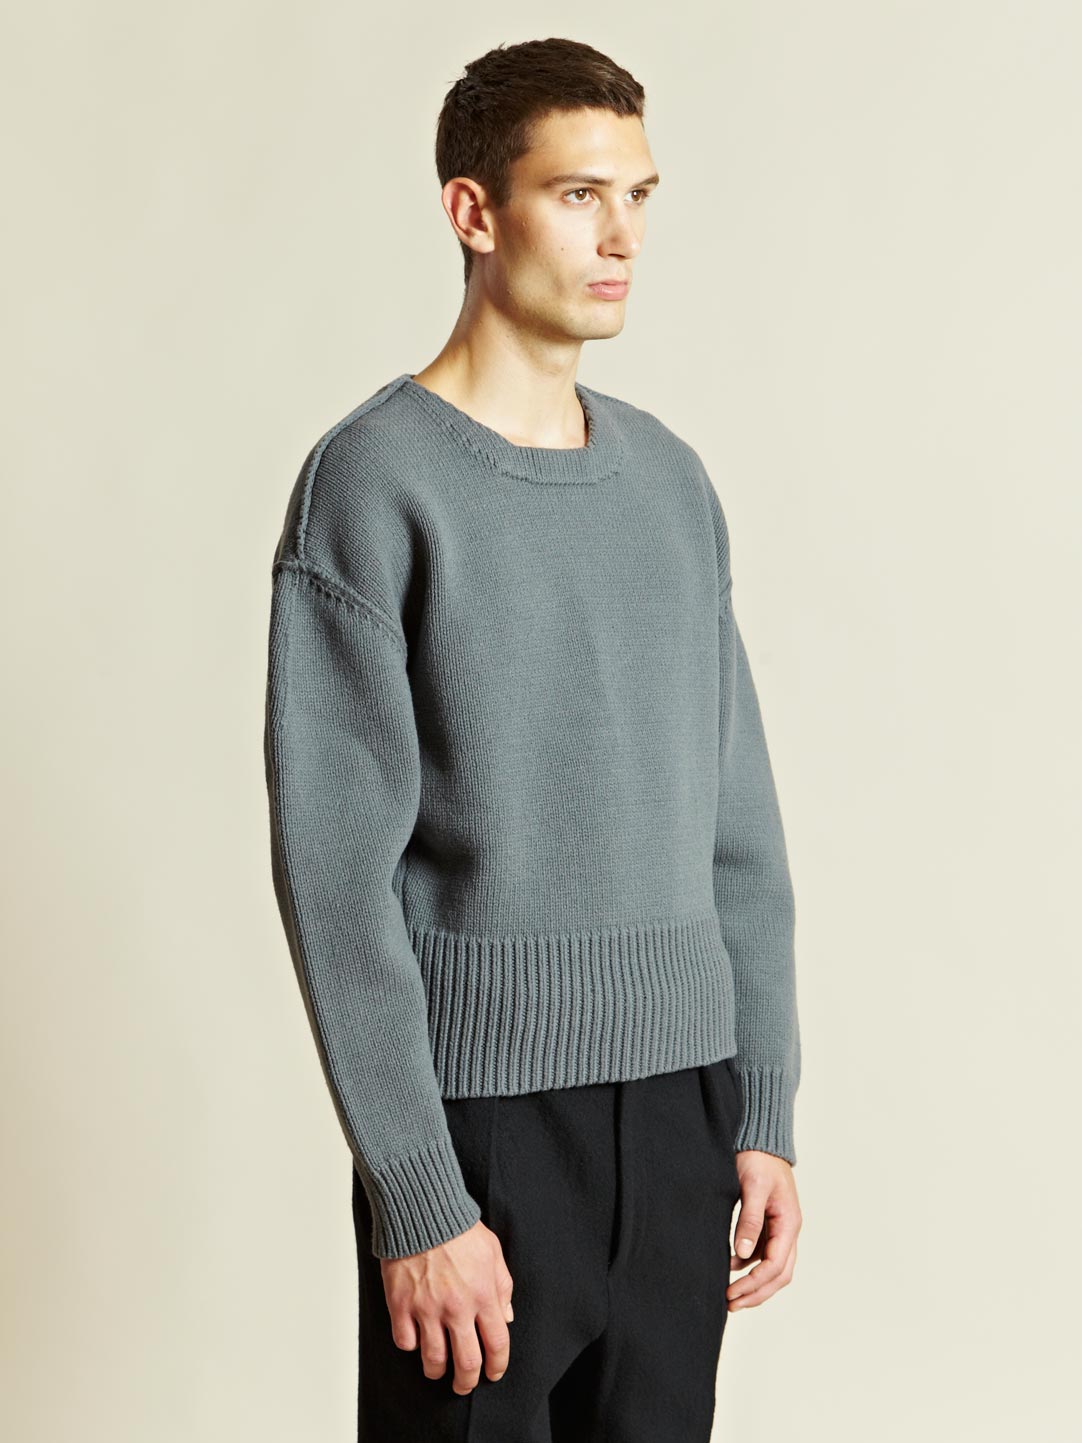 Lyst - Lanvin Lanvin Mens Compact Wool Round Neck Sweater in Gray for Men